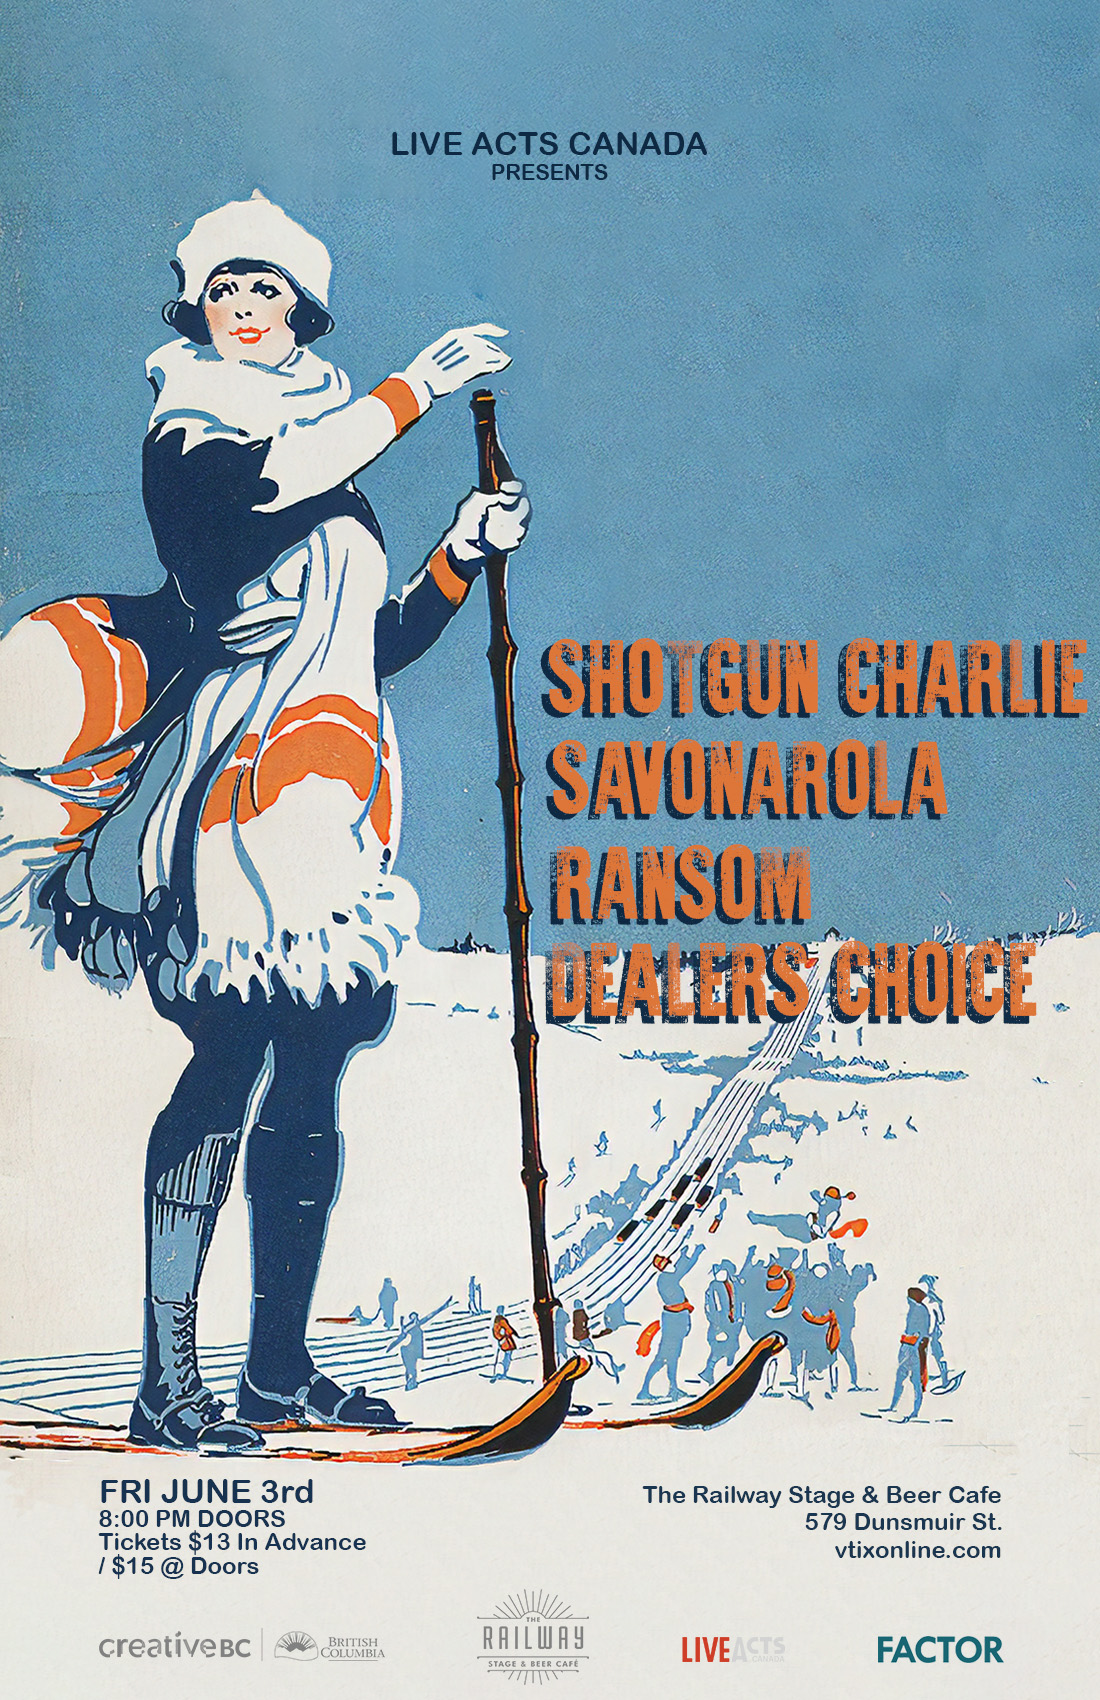 Shotgun Charlie With Special Guests, Savonarola, Ransom, and Dealers Choice 